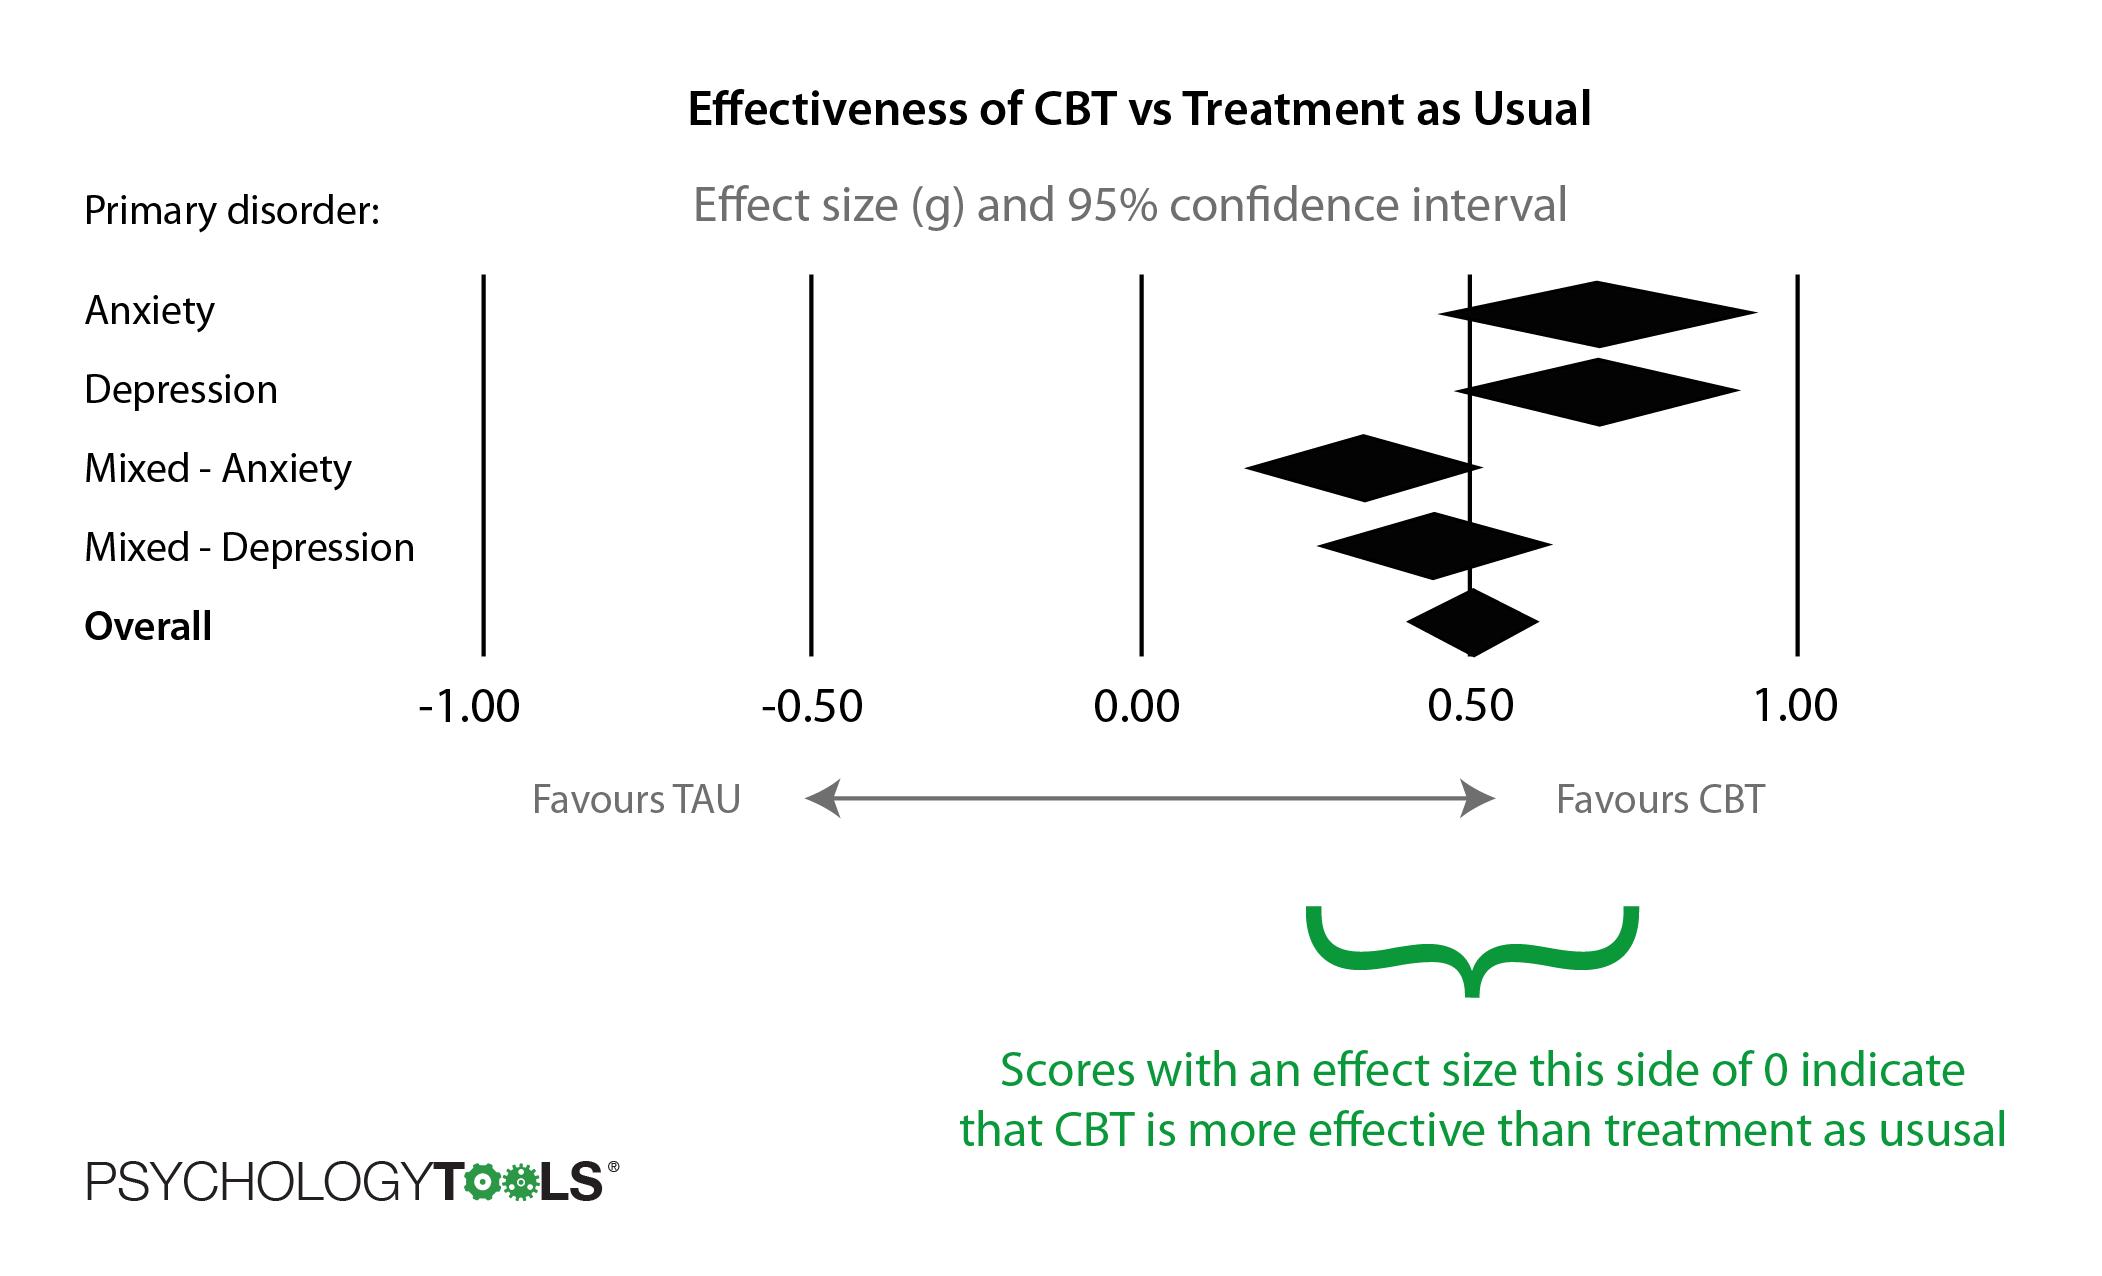 The effectiveness of CBT versus treatment as usual